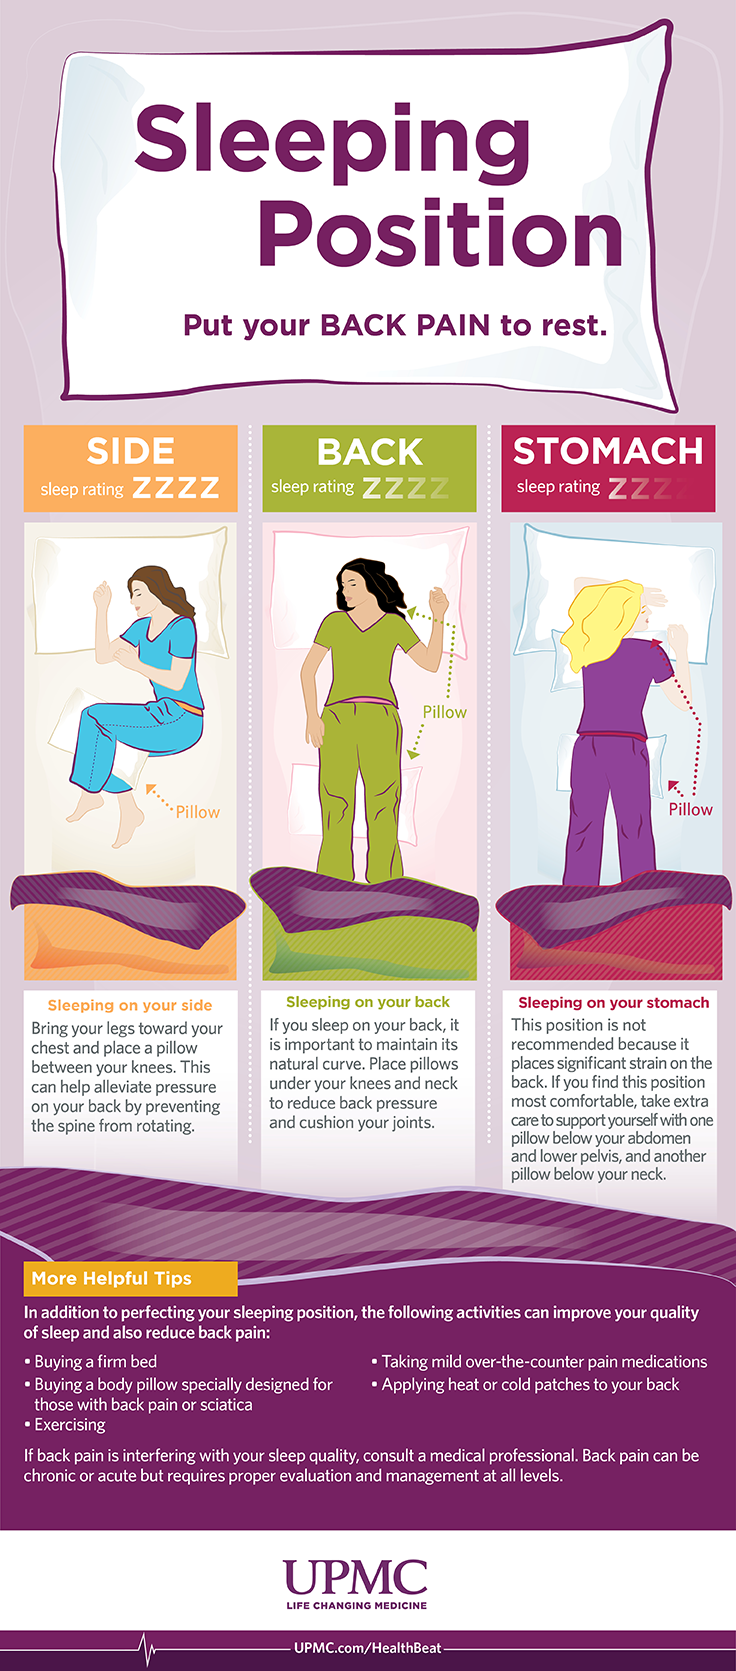 reduce back pain by sleeping position | upmc healthbeat